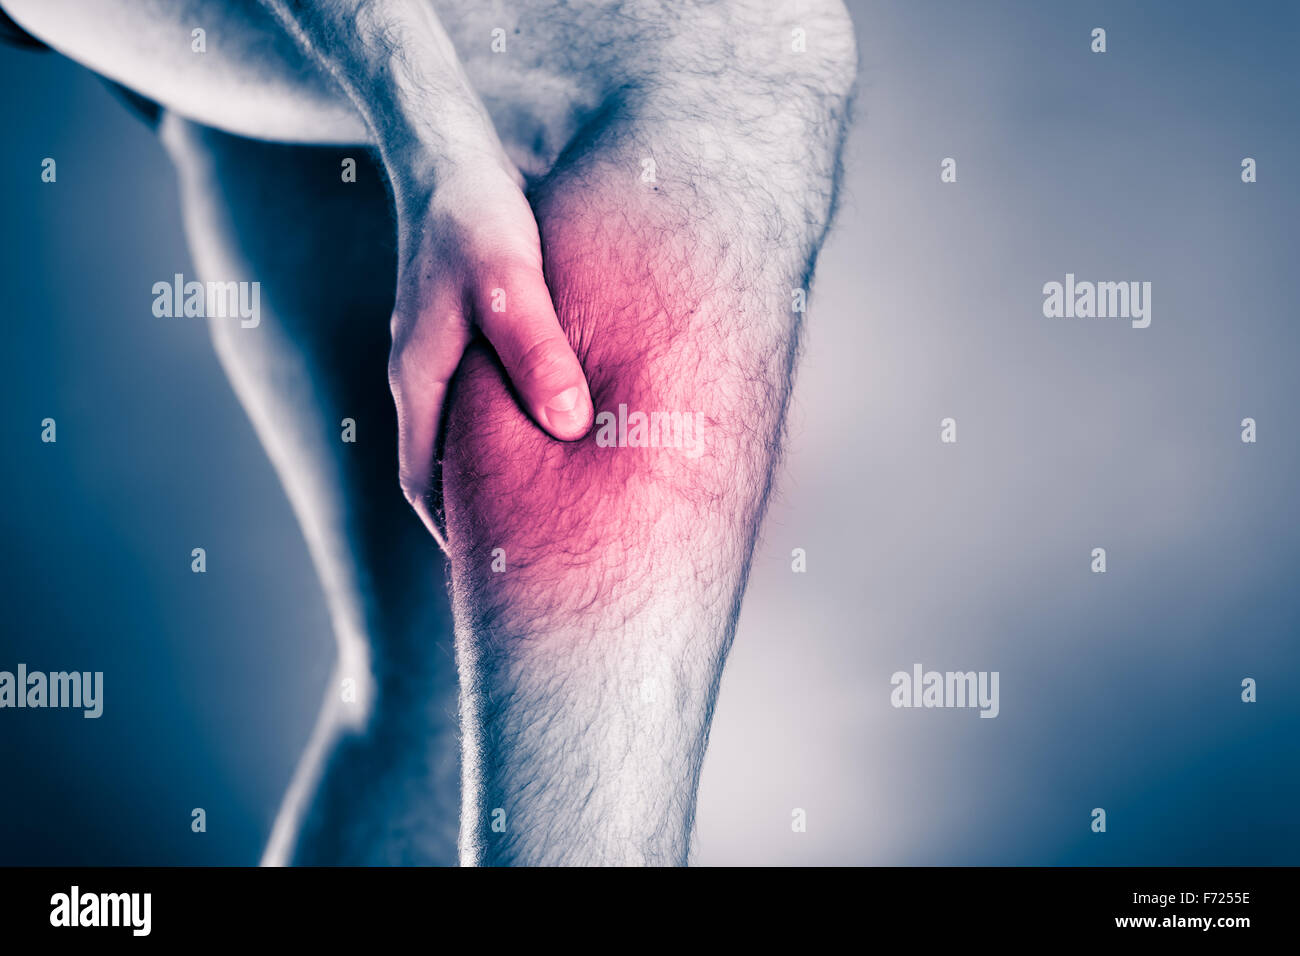 Calf pain, physical injury. Male leg and muscle pain from running or training, sport physical injuries when working out. Stock Photo